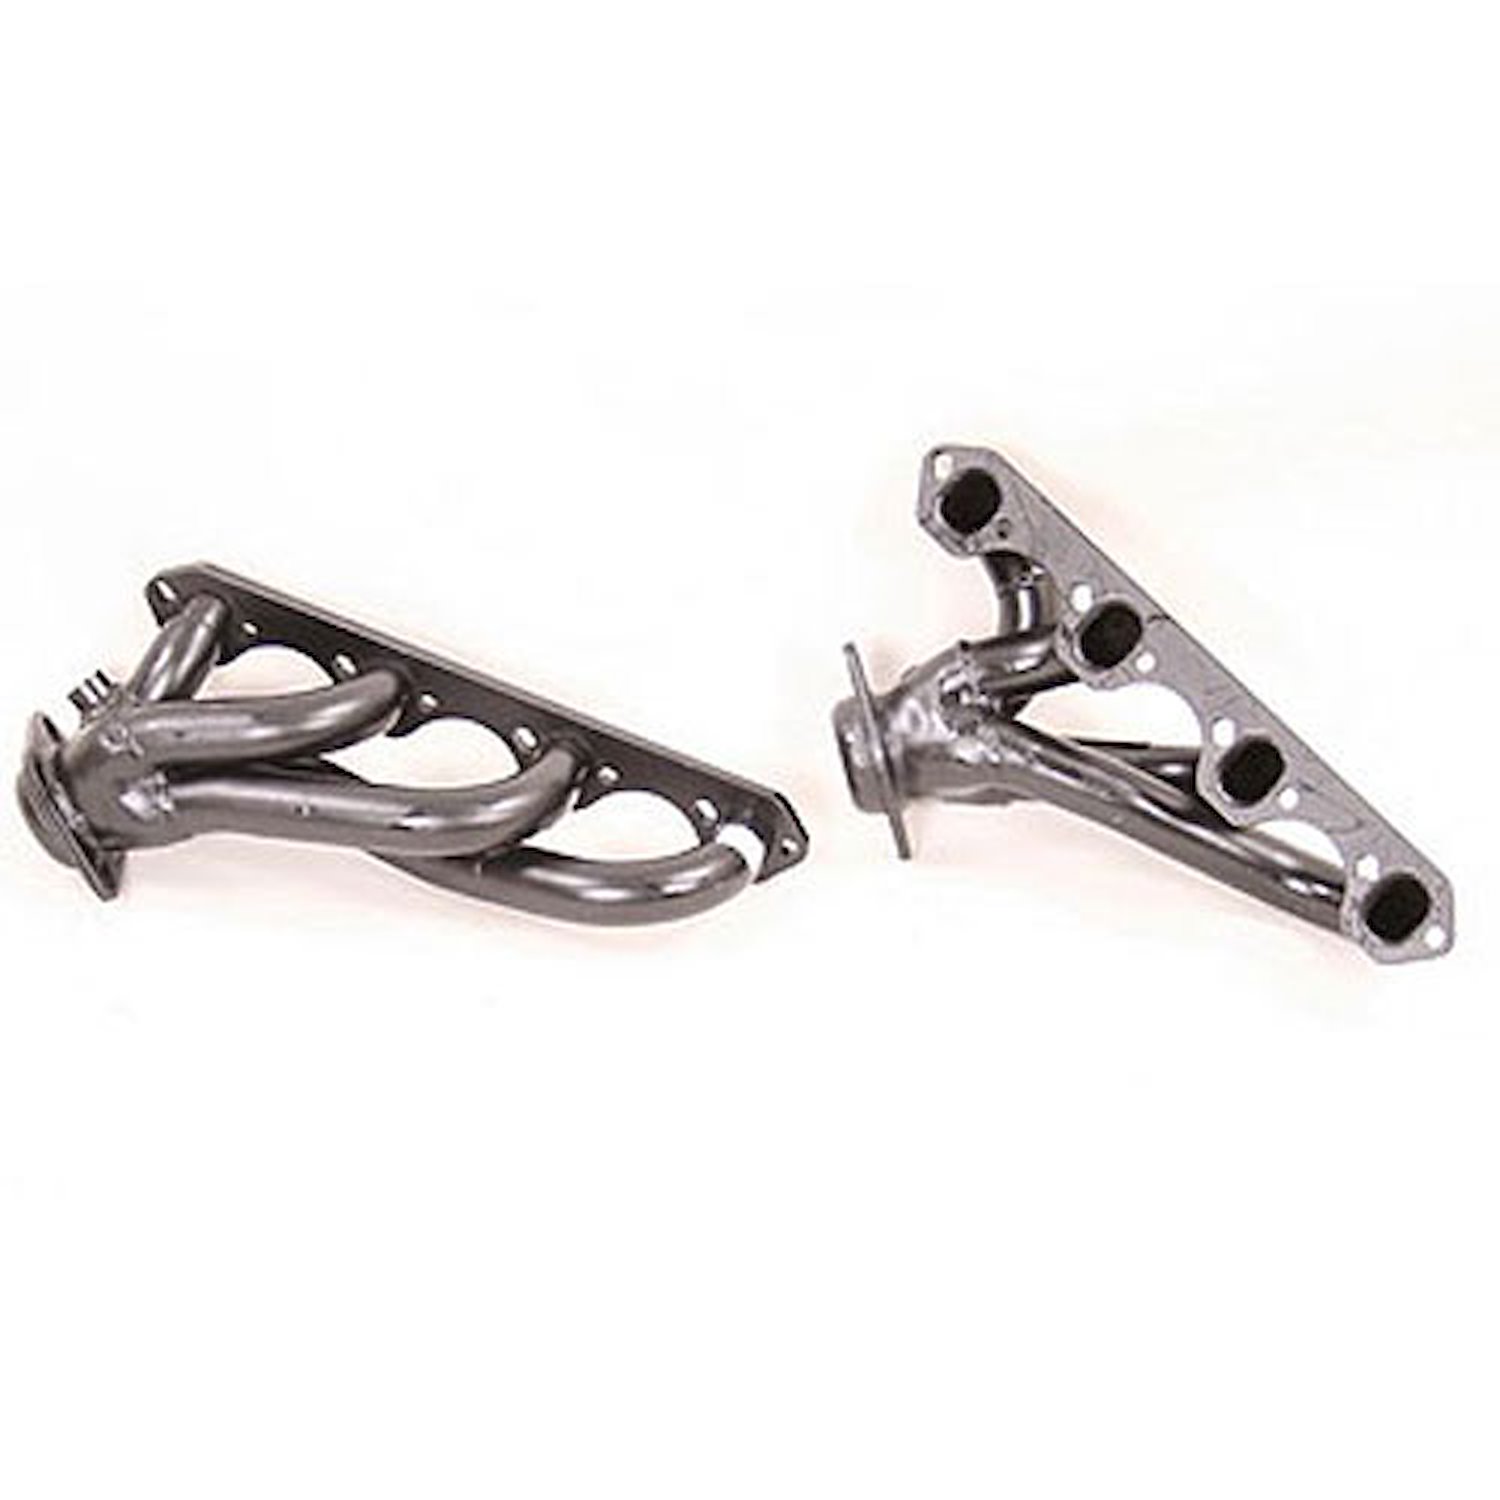 Painted Truck Headers 1987-95 Ford F-150/F-250 and Bronco 2WD/4WD 5.0L